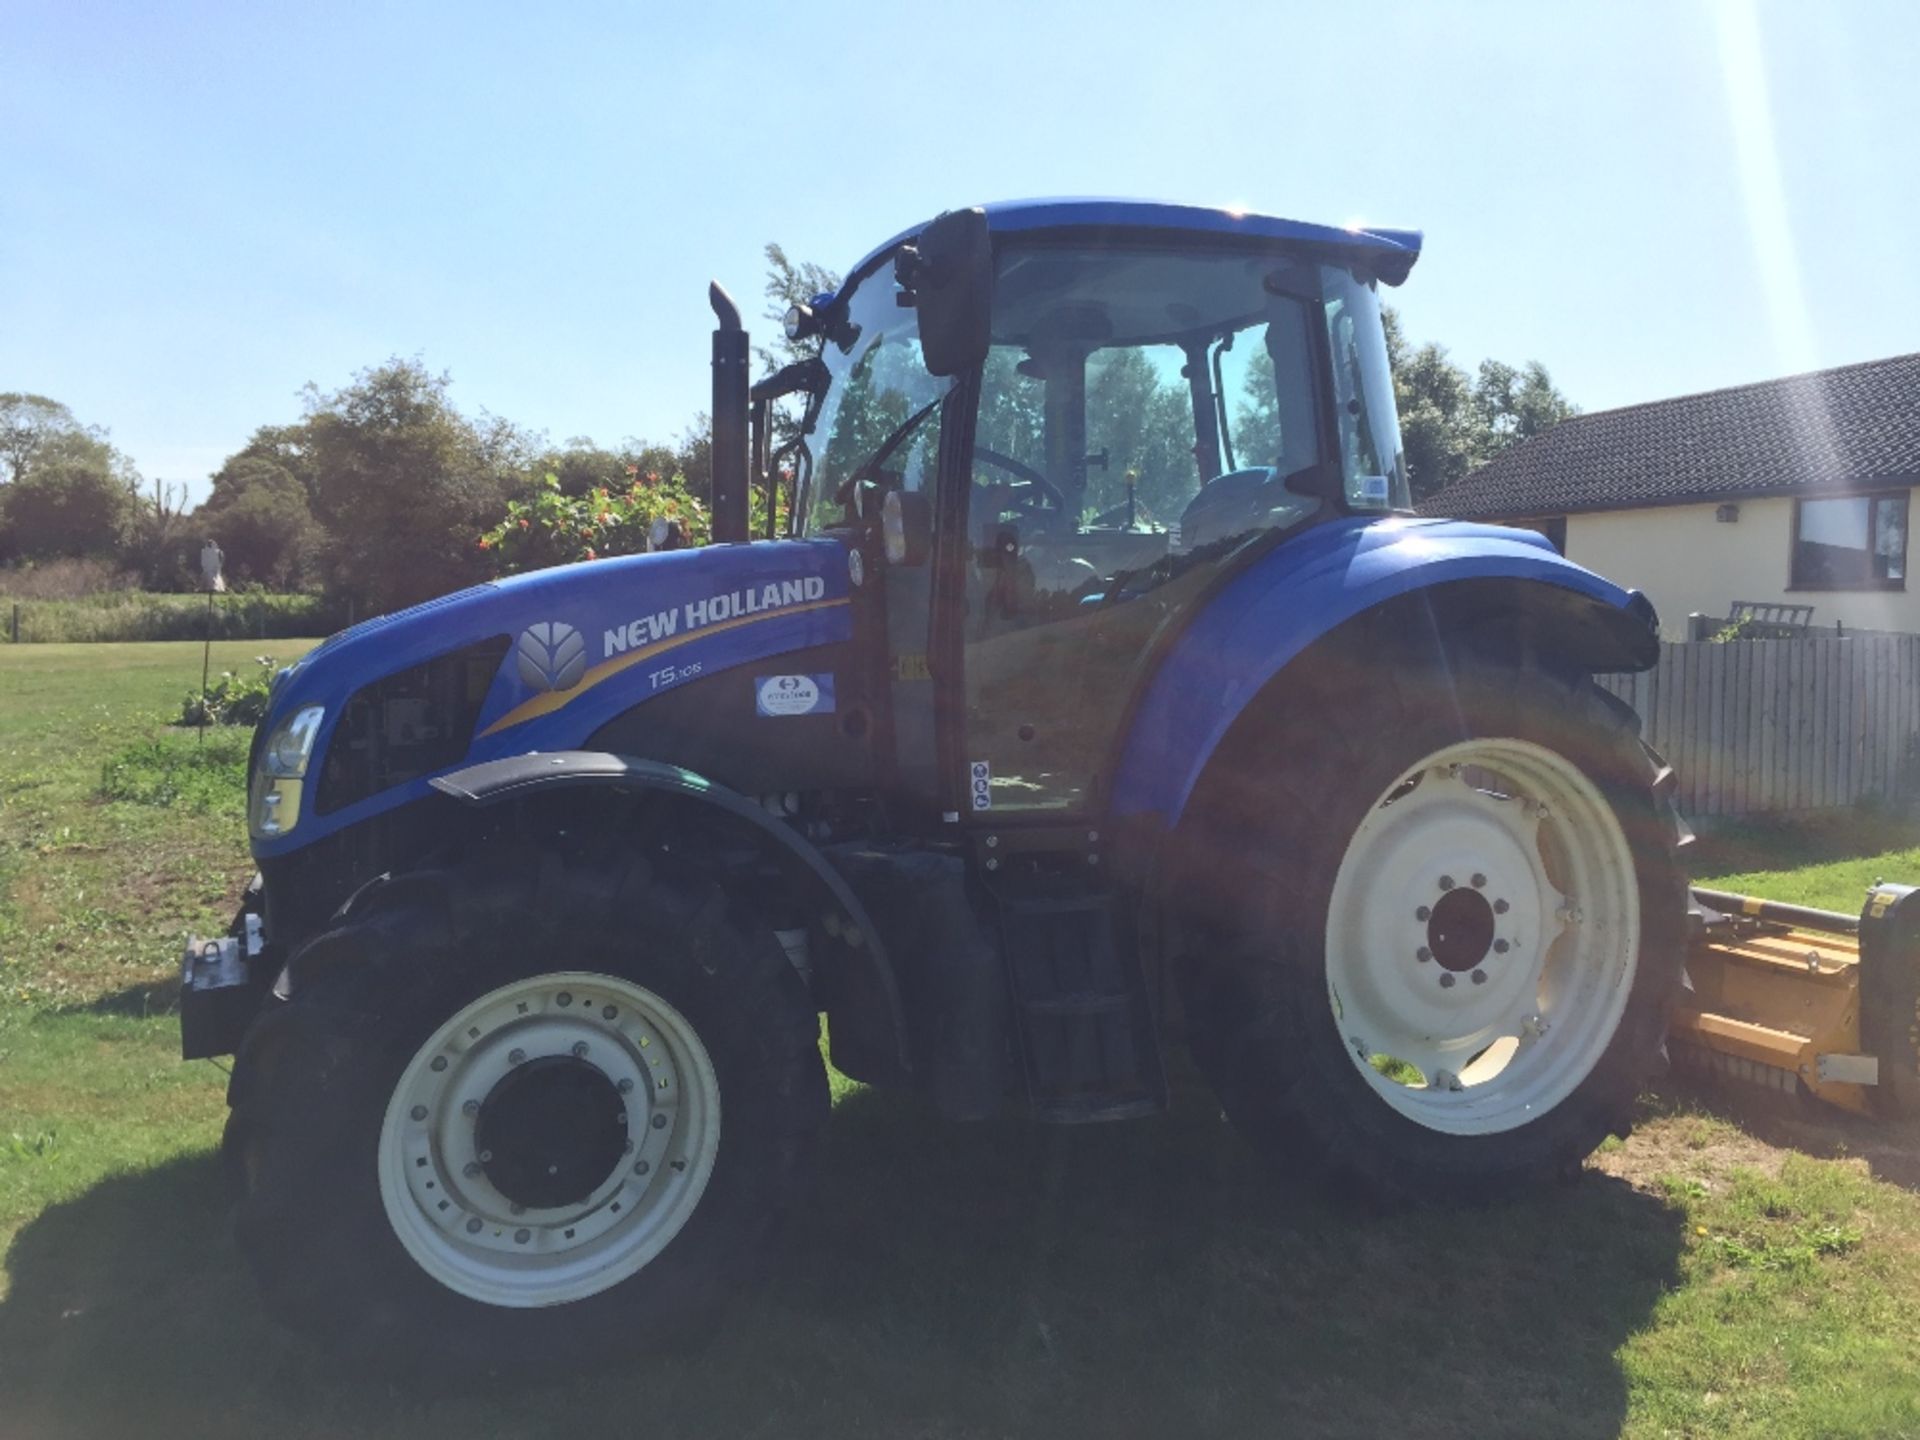 2015 New Holland T5.105 4wd Tractor 711.4hrs 13.6R38 rear wheels 13. - Image 5 of 8